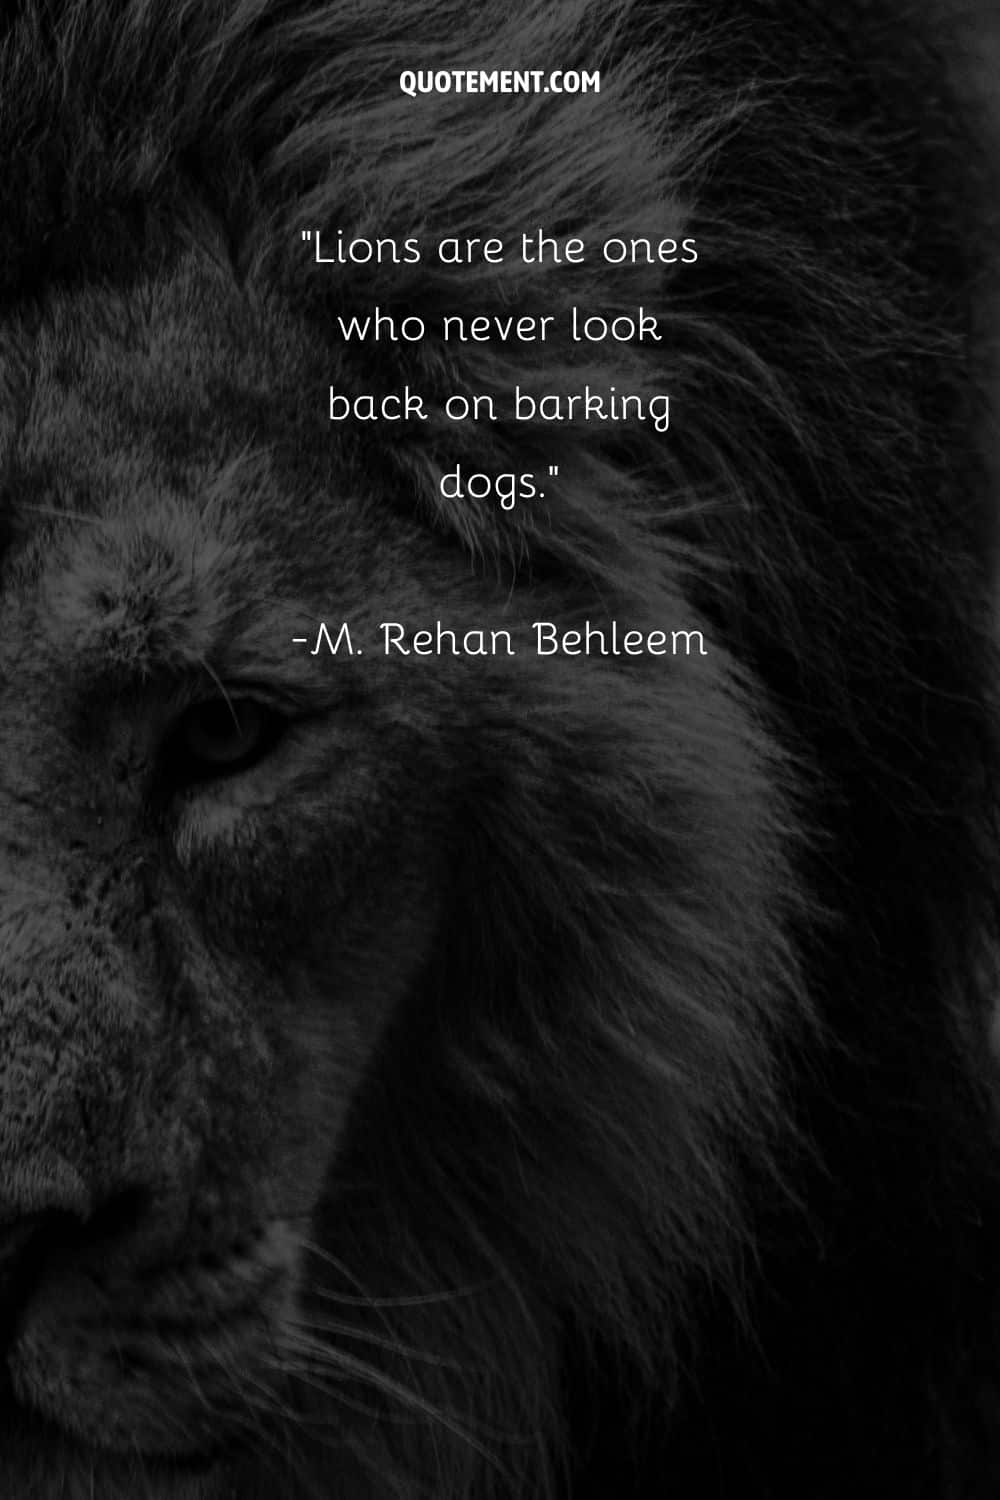 Lions are the ones who never look back on barking dogs